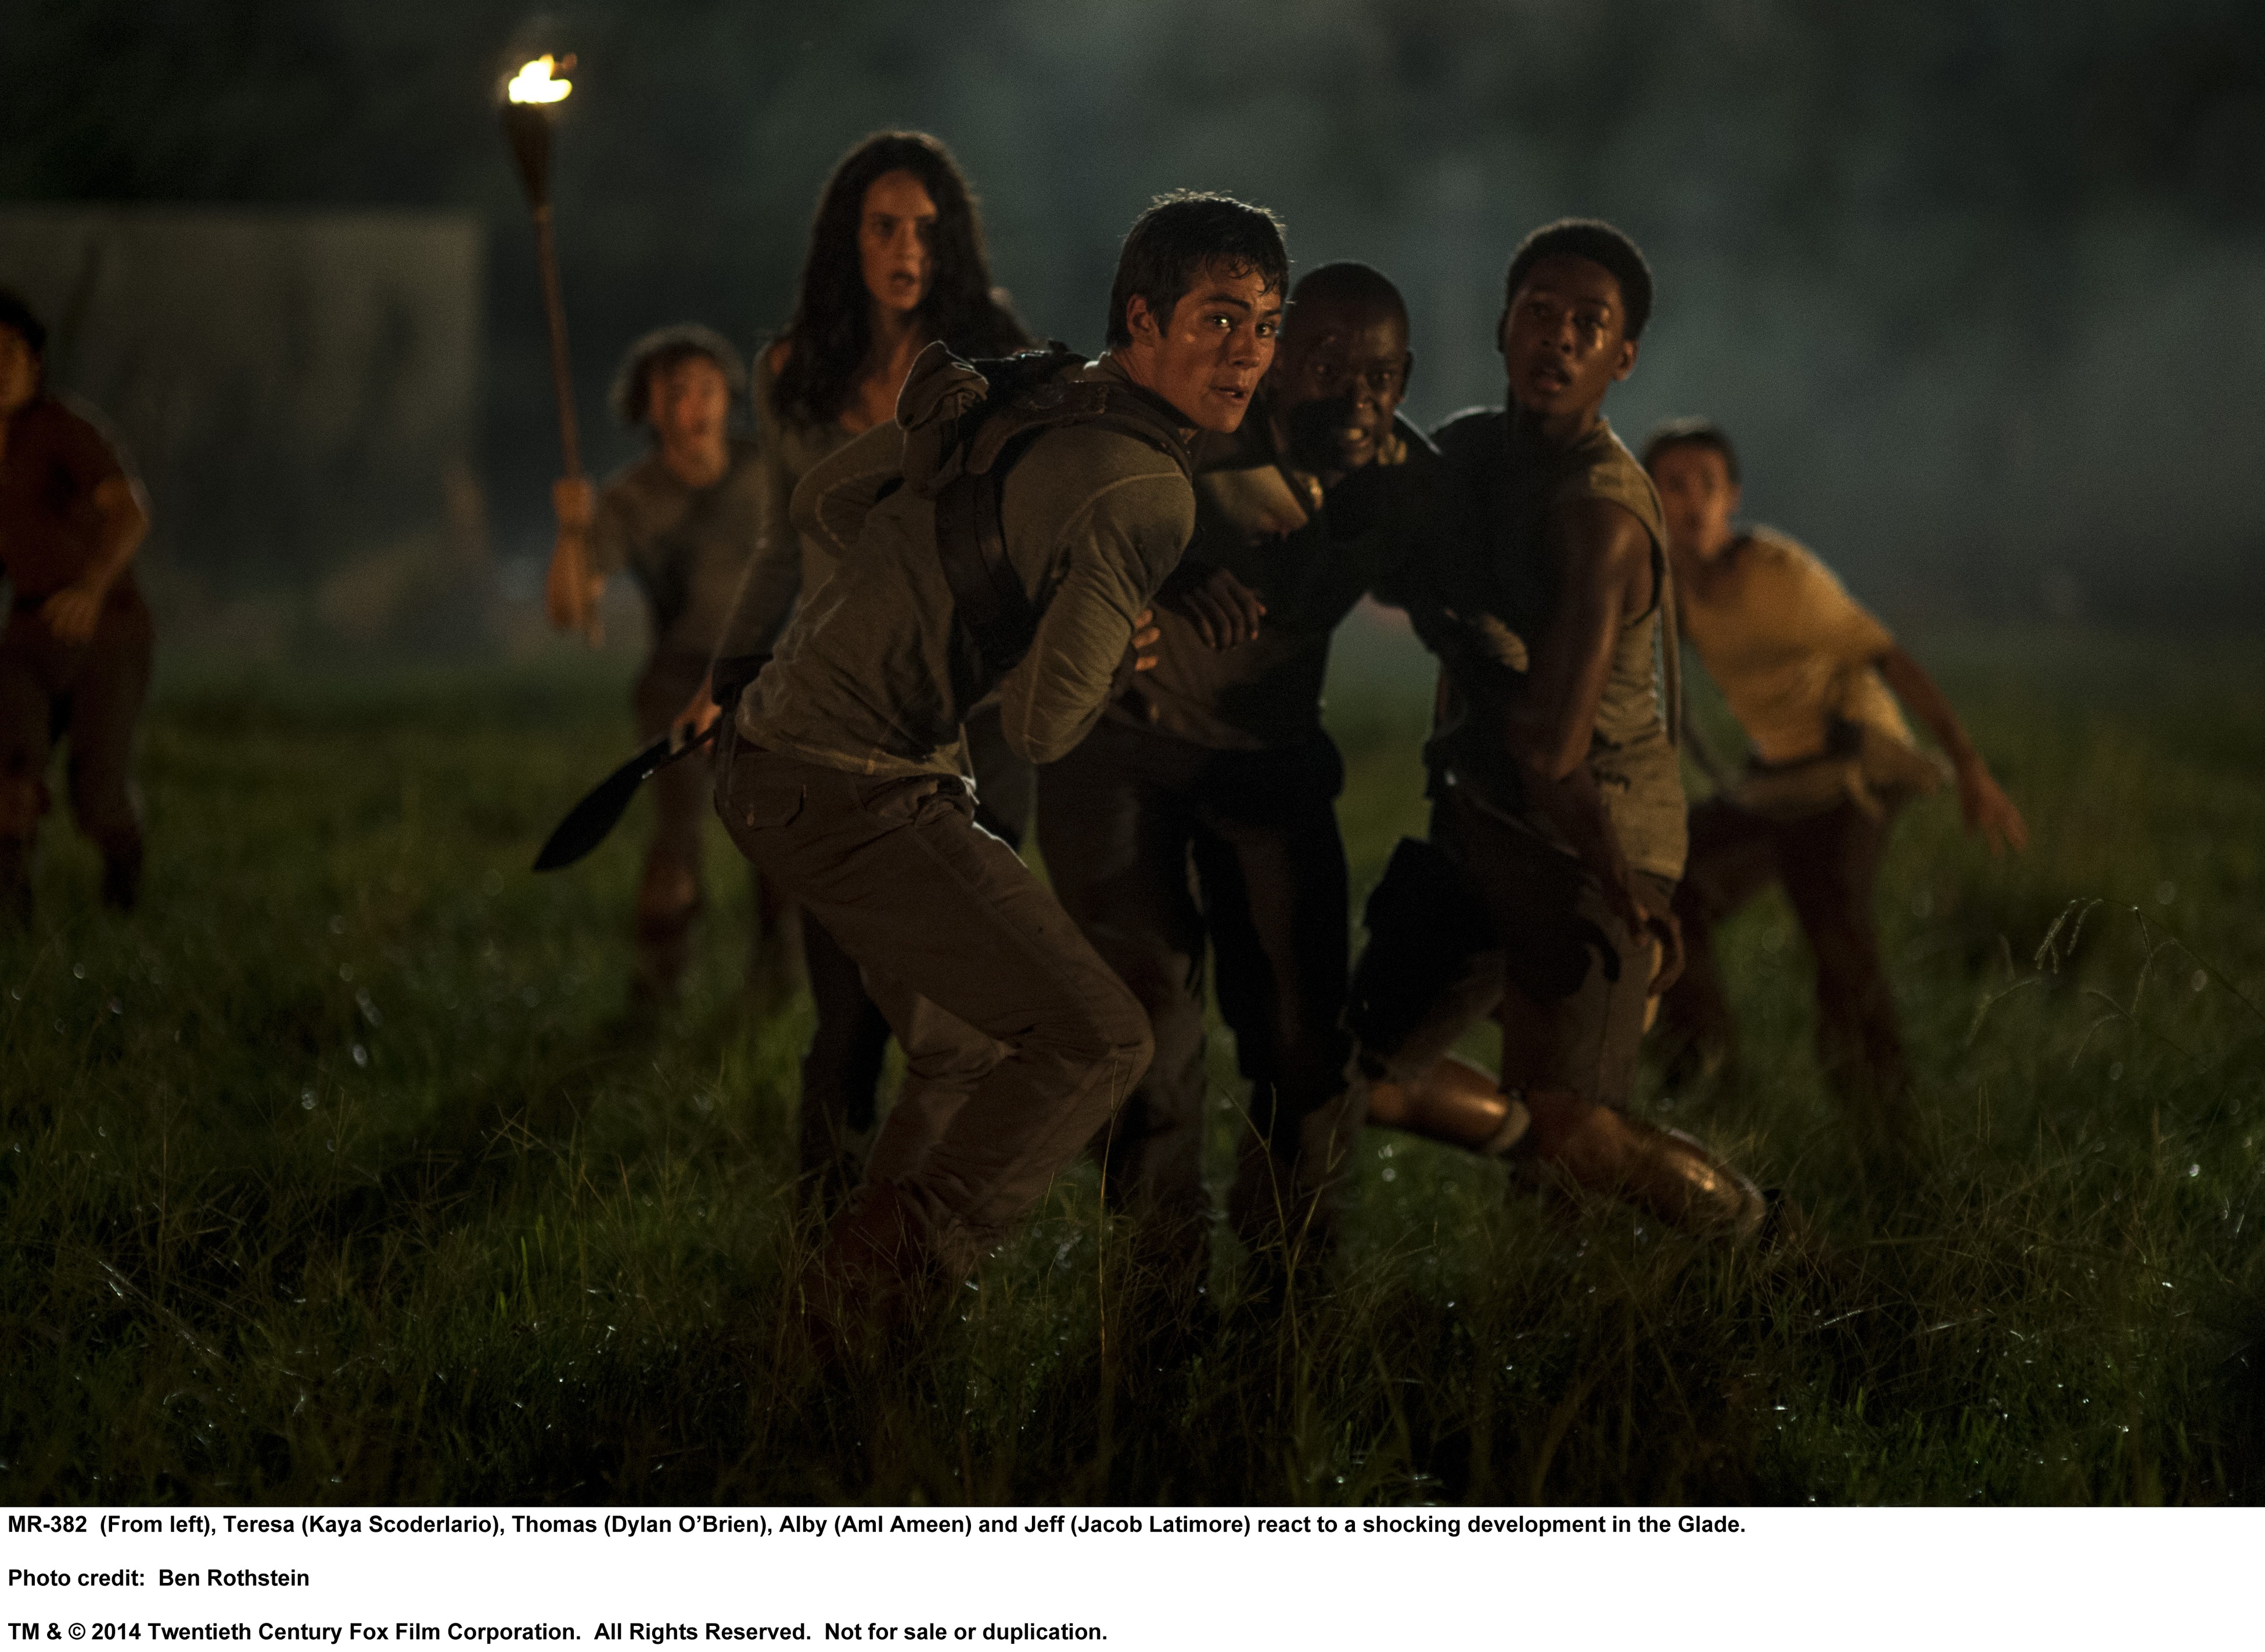 Maze Runner: The Scorch Trials trailer - 9 interesting things we noticed, London Evening Standard